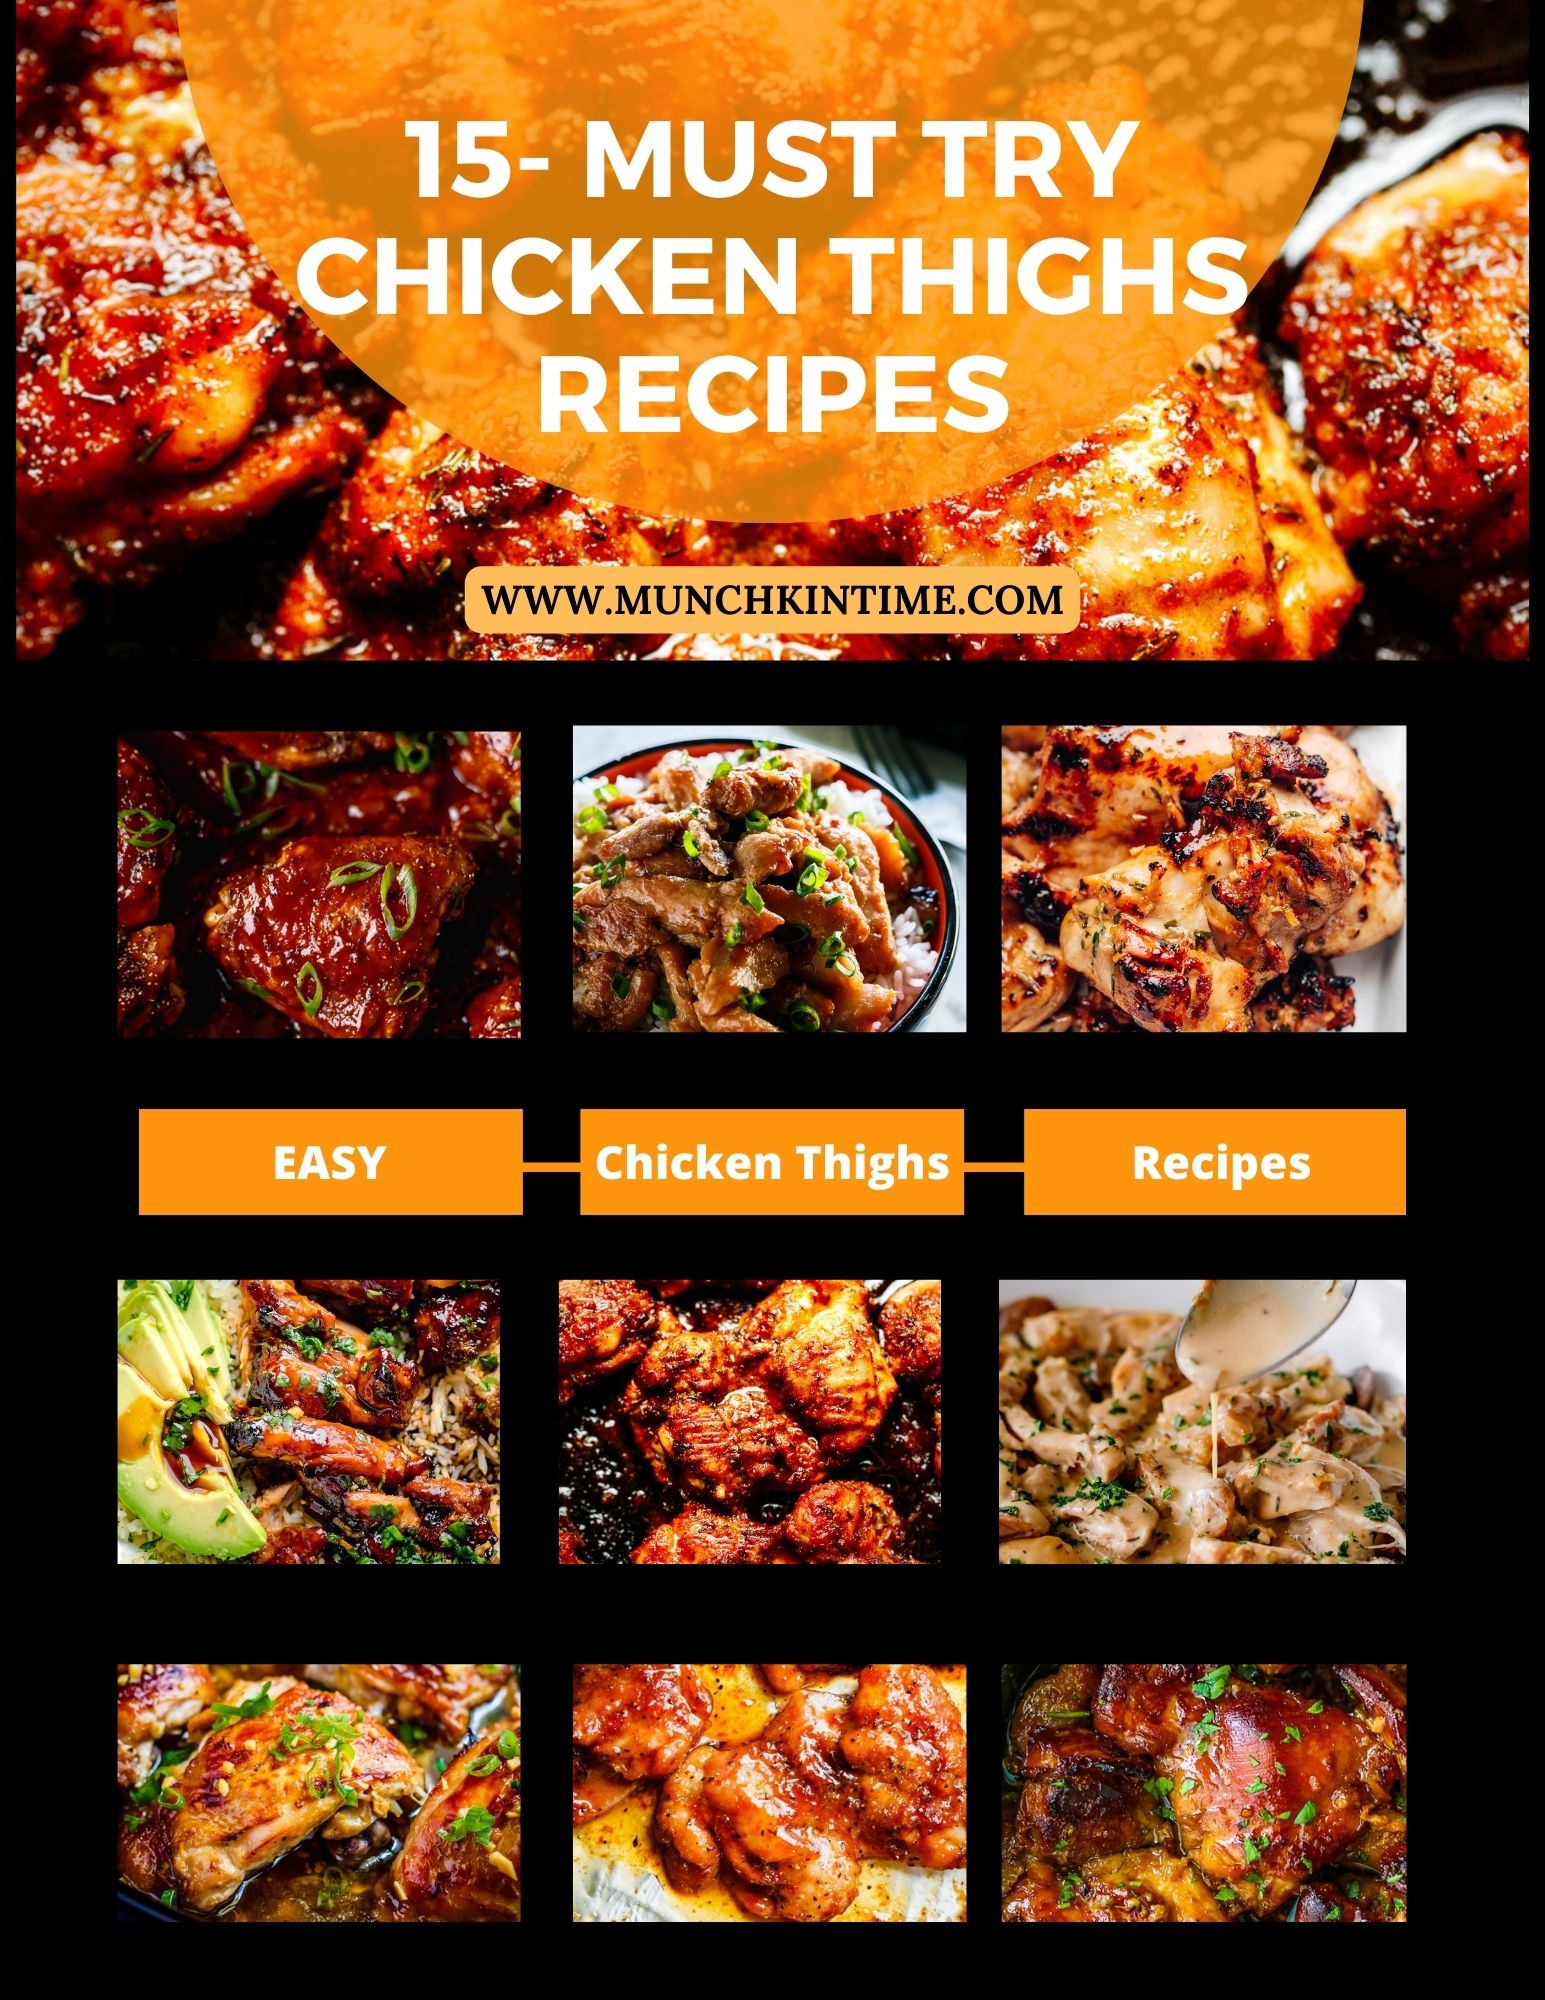 15 Must-Try Chicken Thigh Recipes